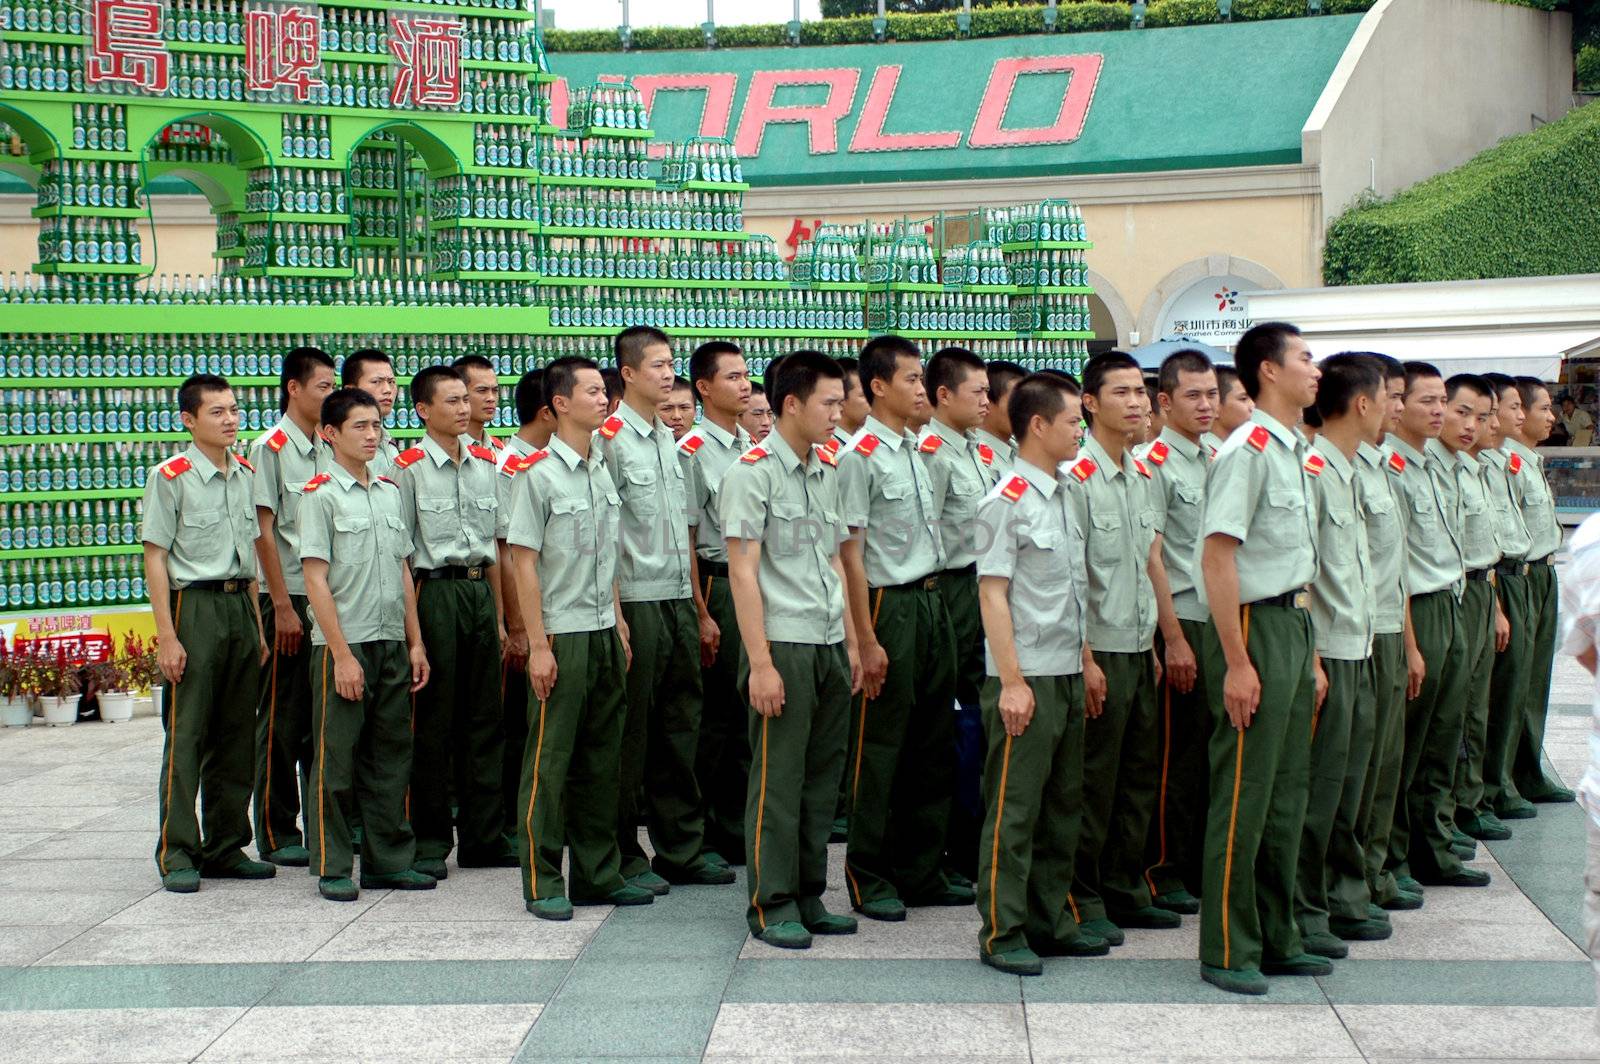 Chinese soldiers during outdoor trip, gathering in front of Window of The World, Shenzhen, China.